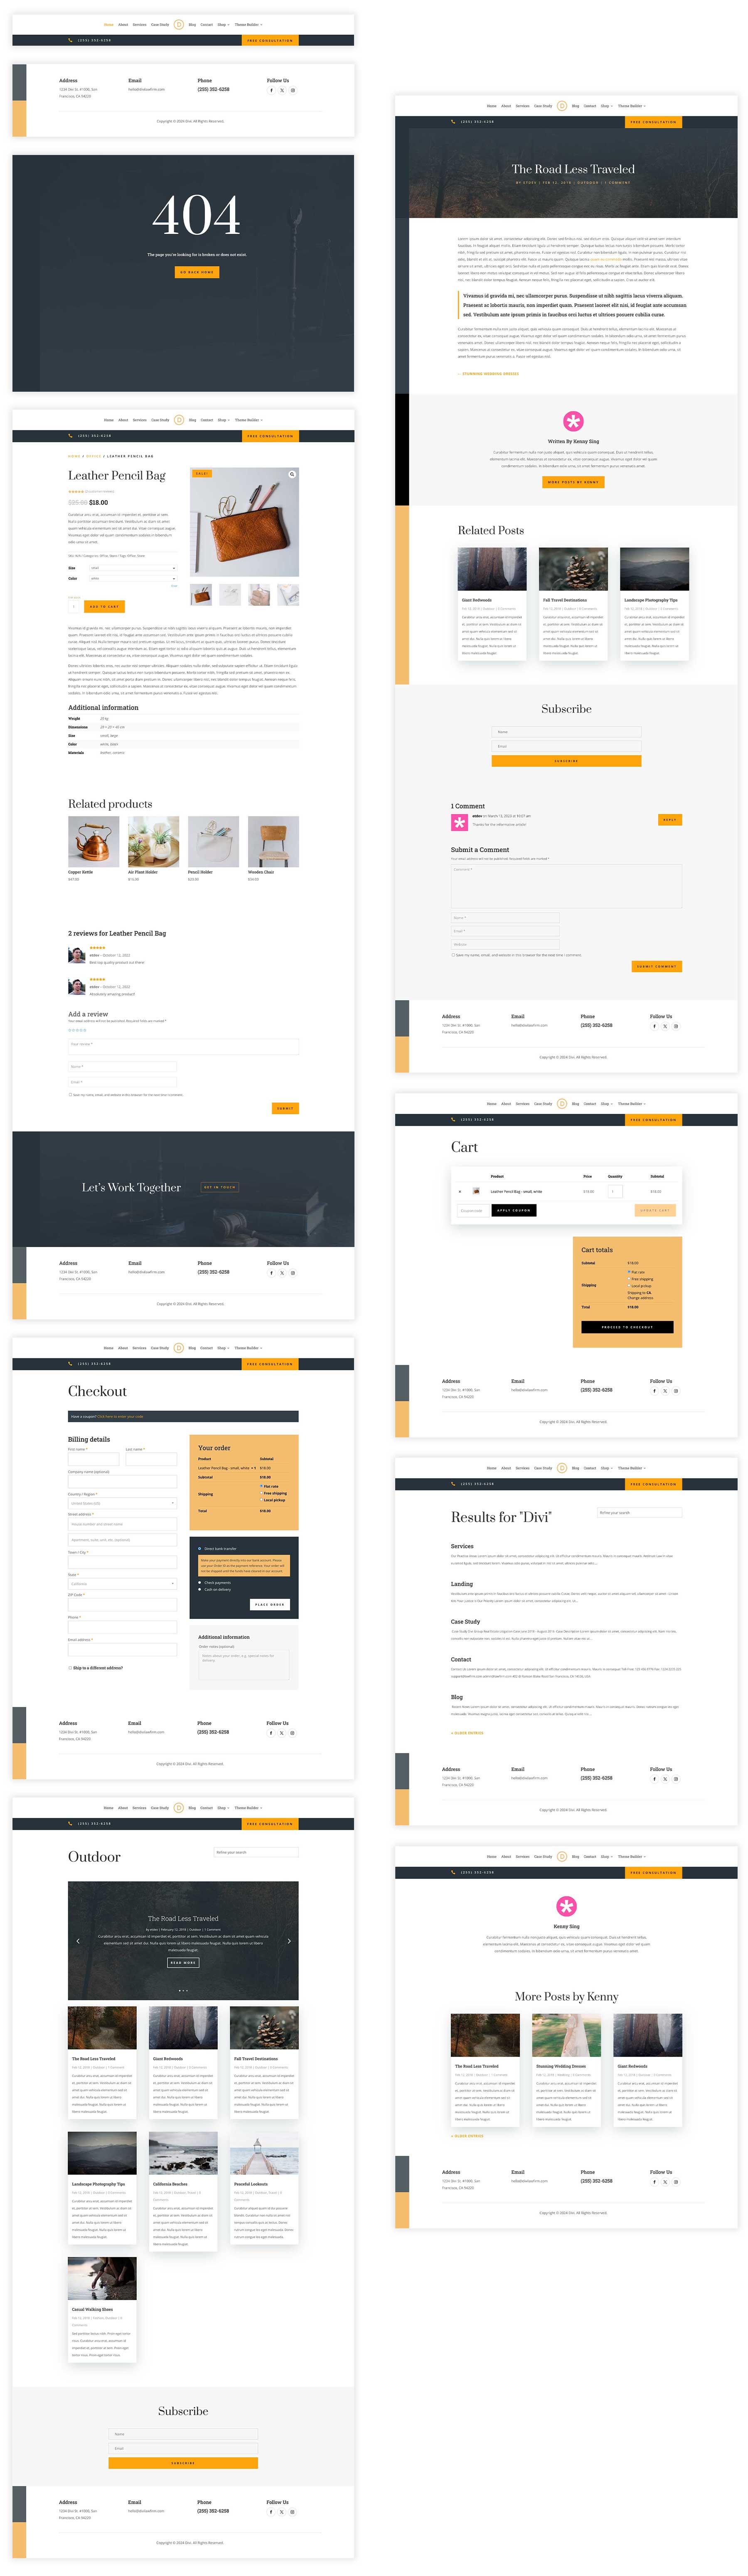 Law Firm theme builder pack